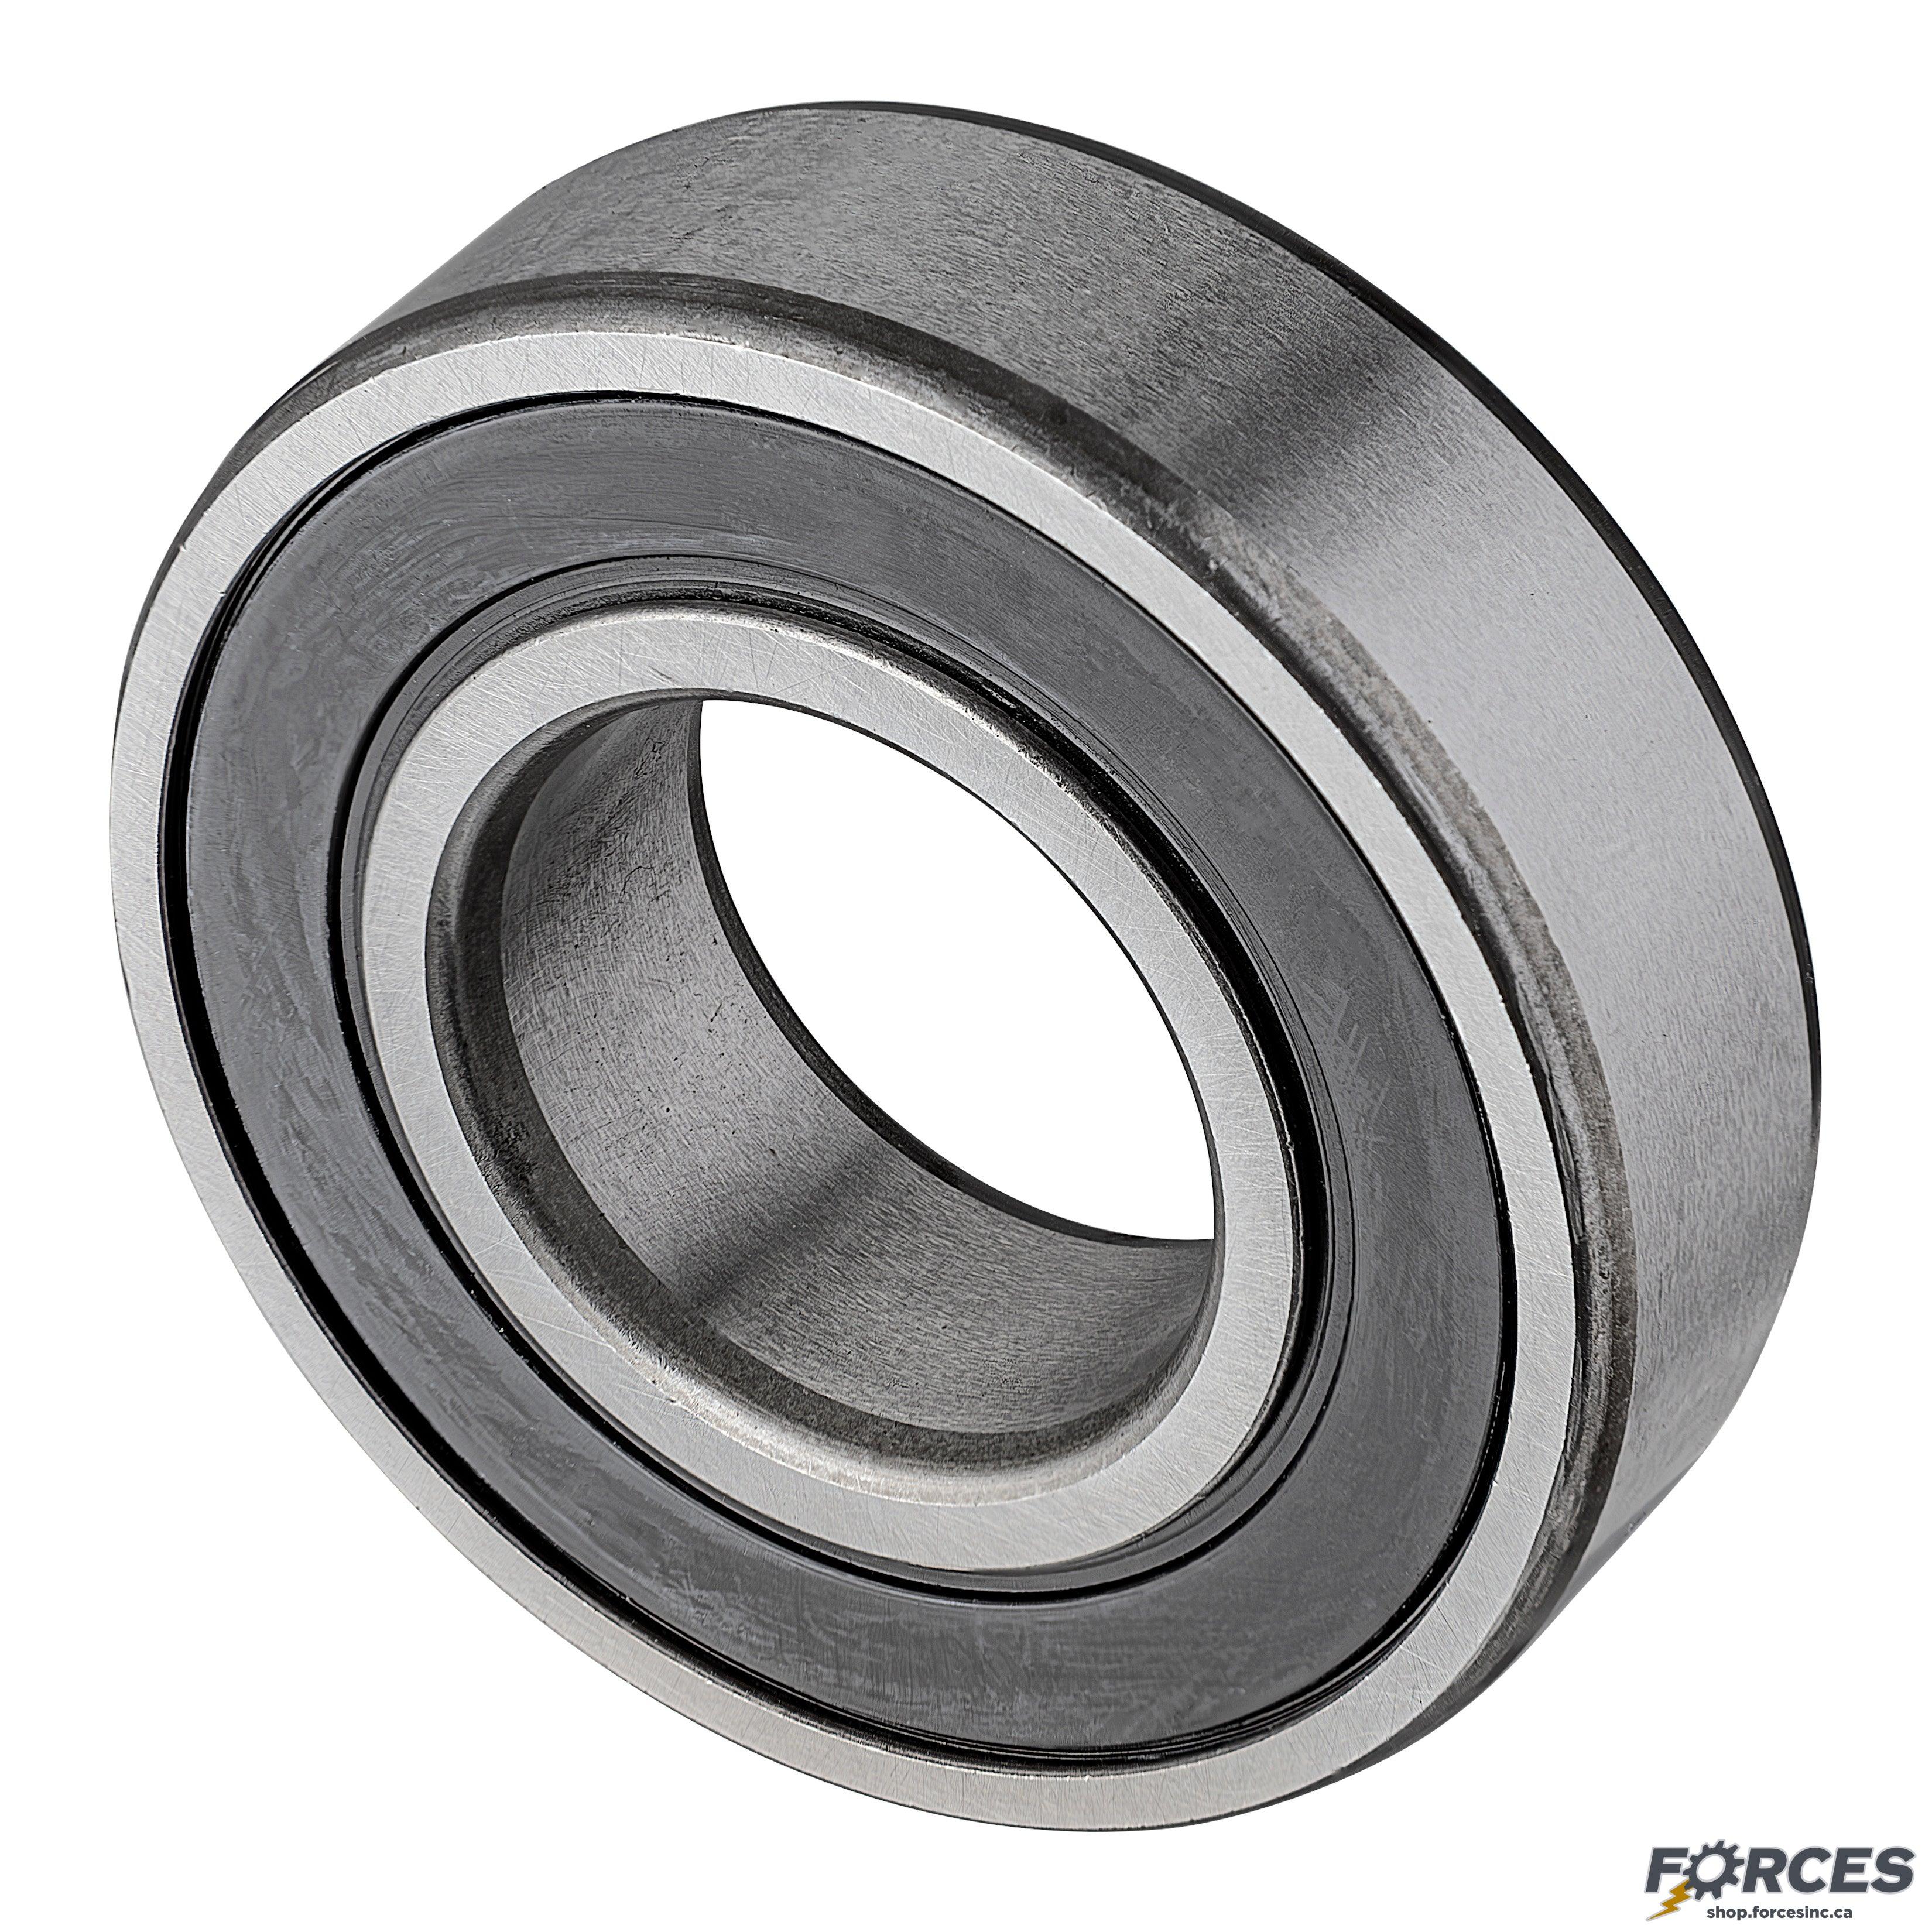 6210-2RS | Ball Bearings Metric 50mmx90mmx20mm Seal 2RS - Forces Inc